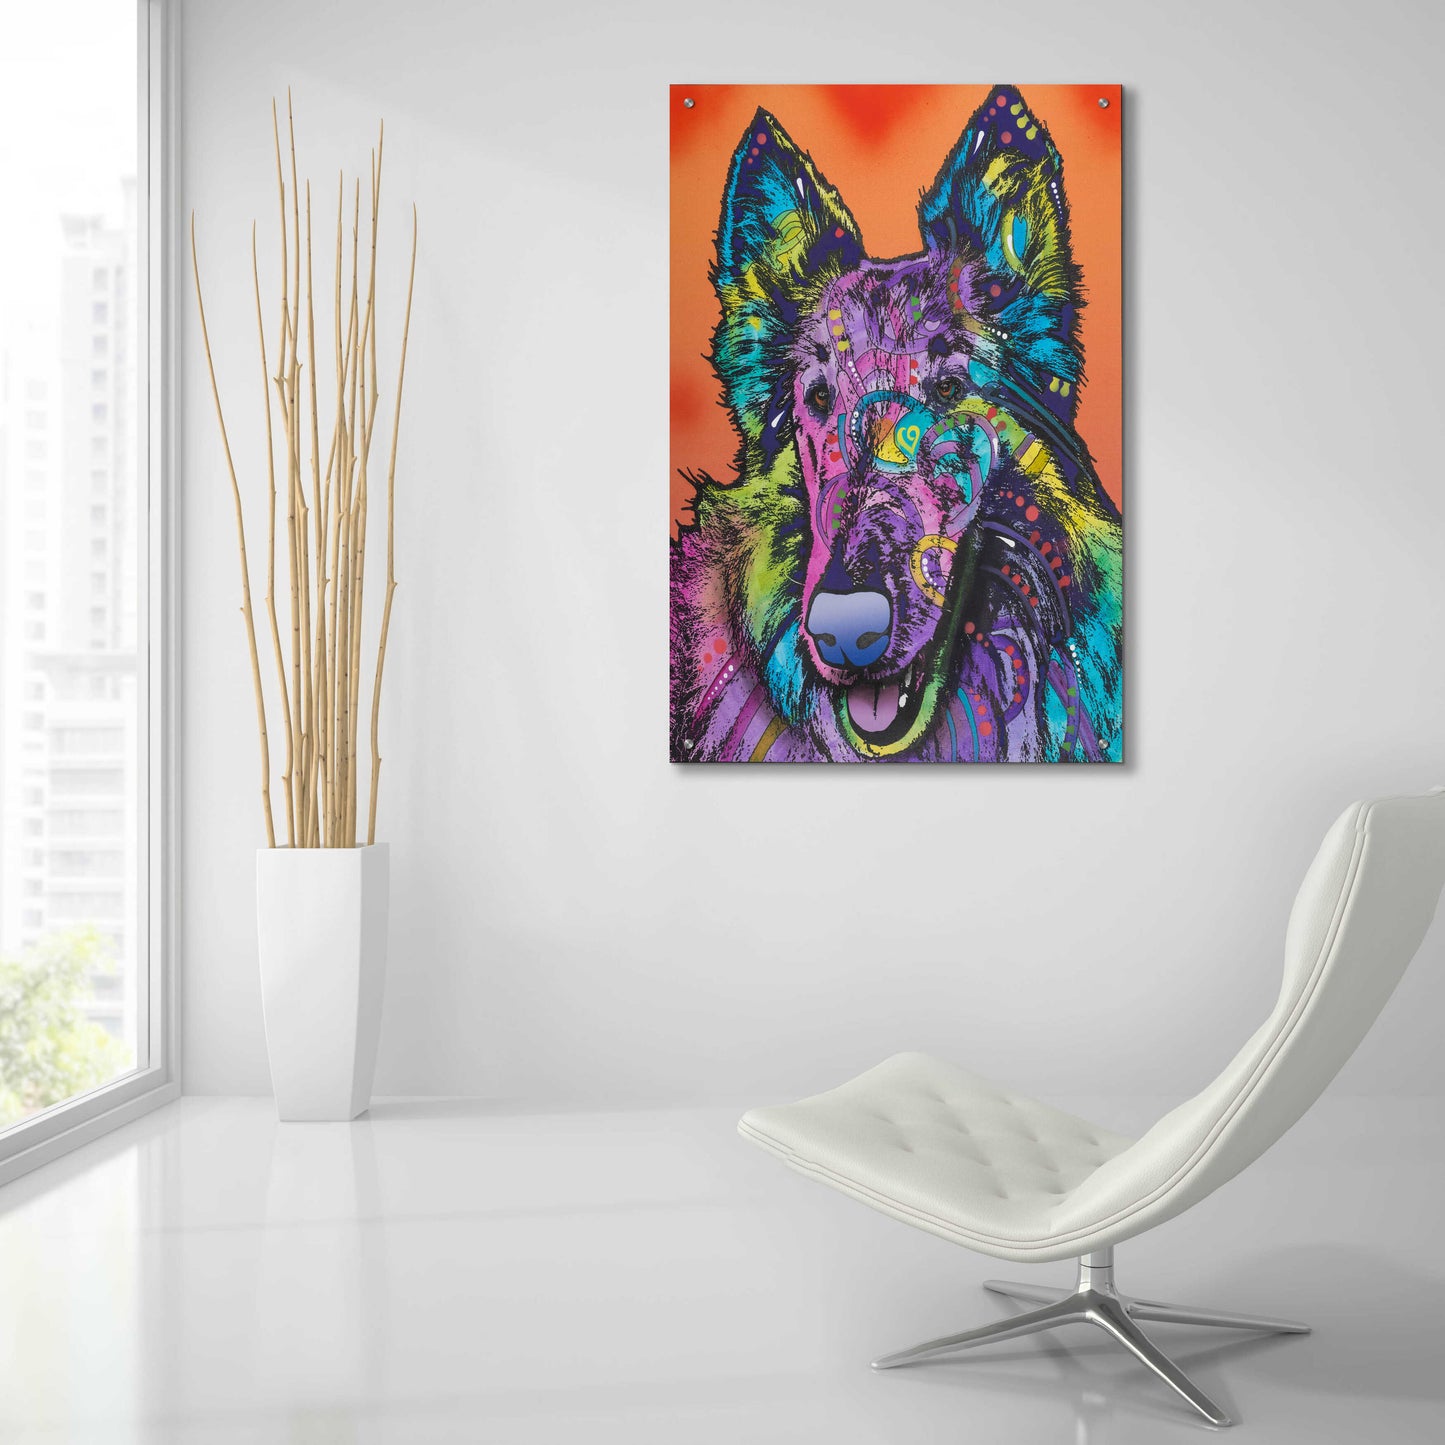 Epic Art 'Ava' by Dean Russo, Acrylic Glass Wall Art,24x36